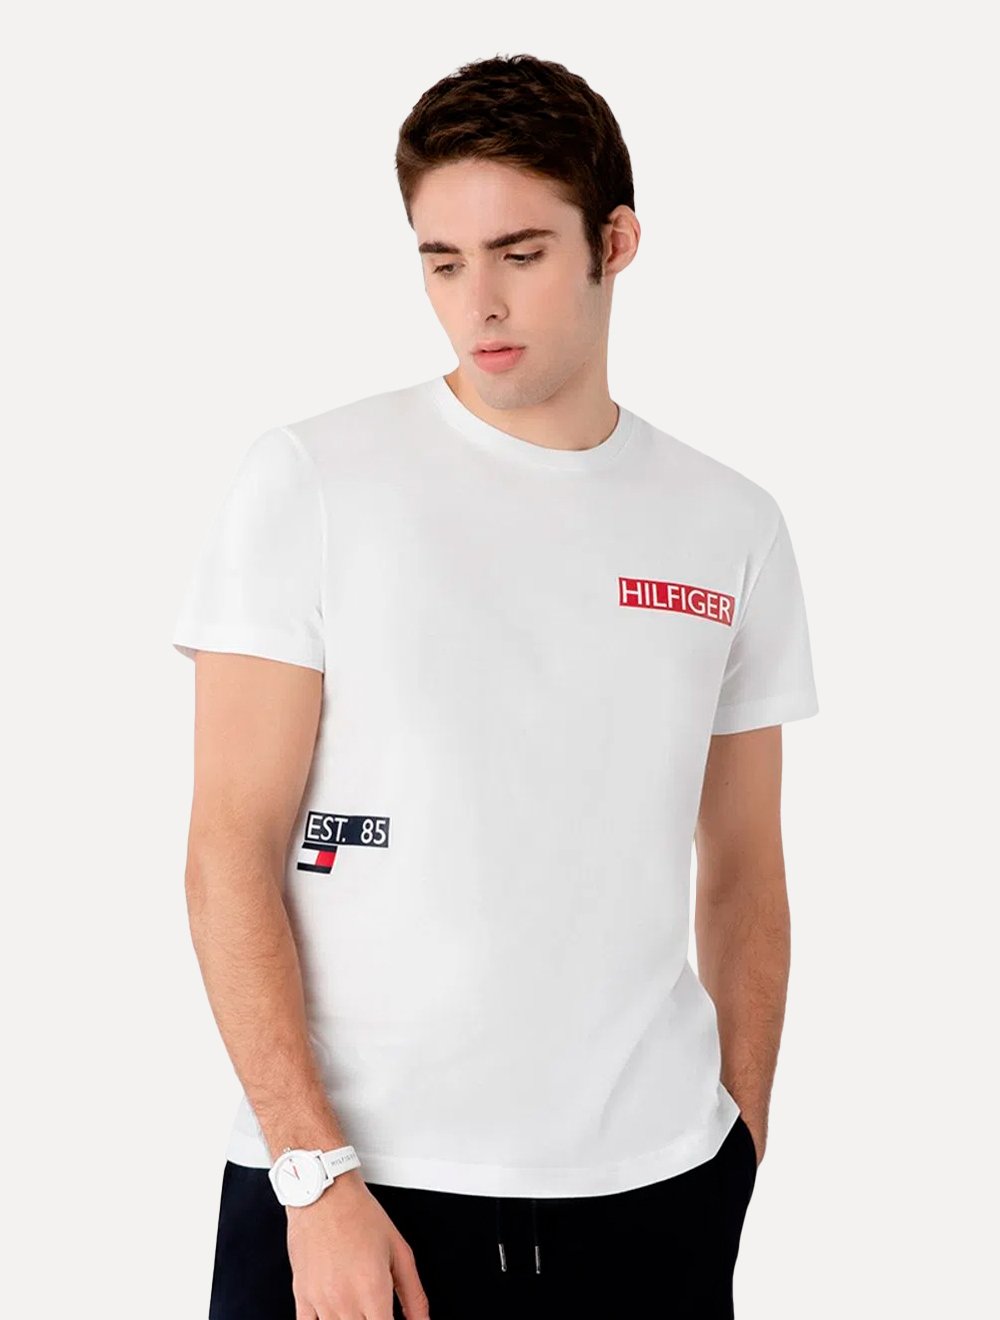 Camiseta Tommy Hilfiger Masculina Rectangle Space Branca